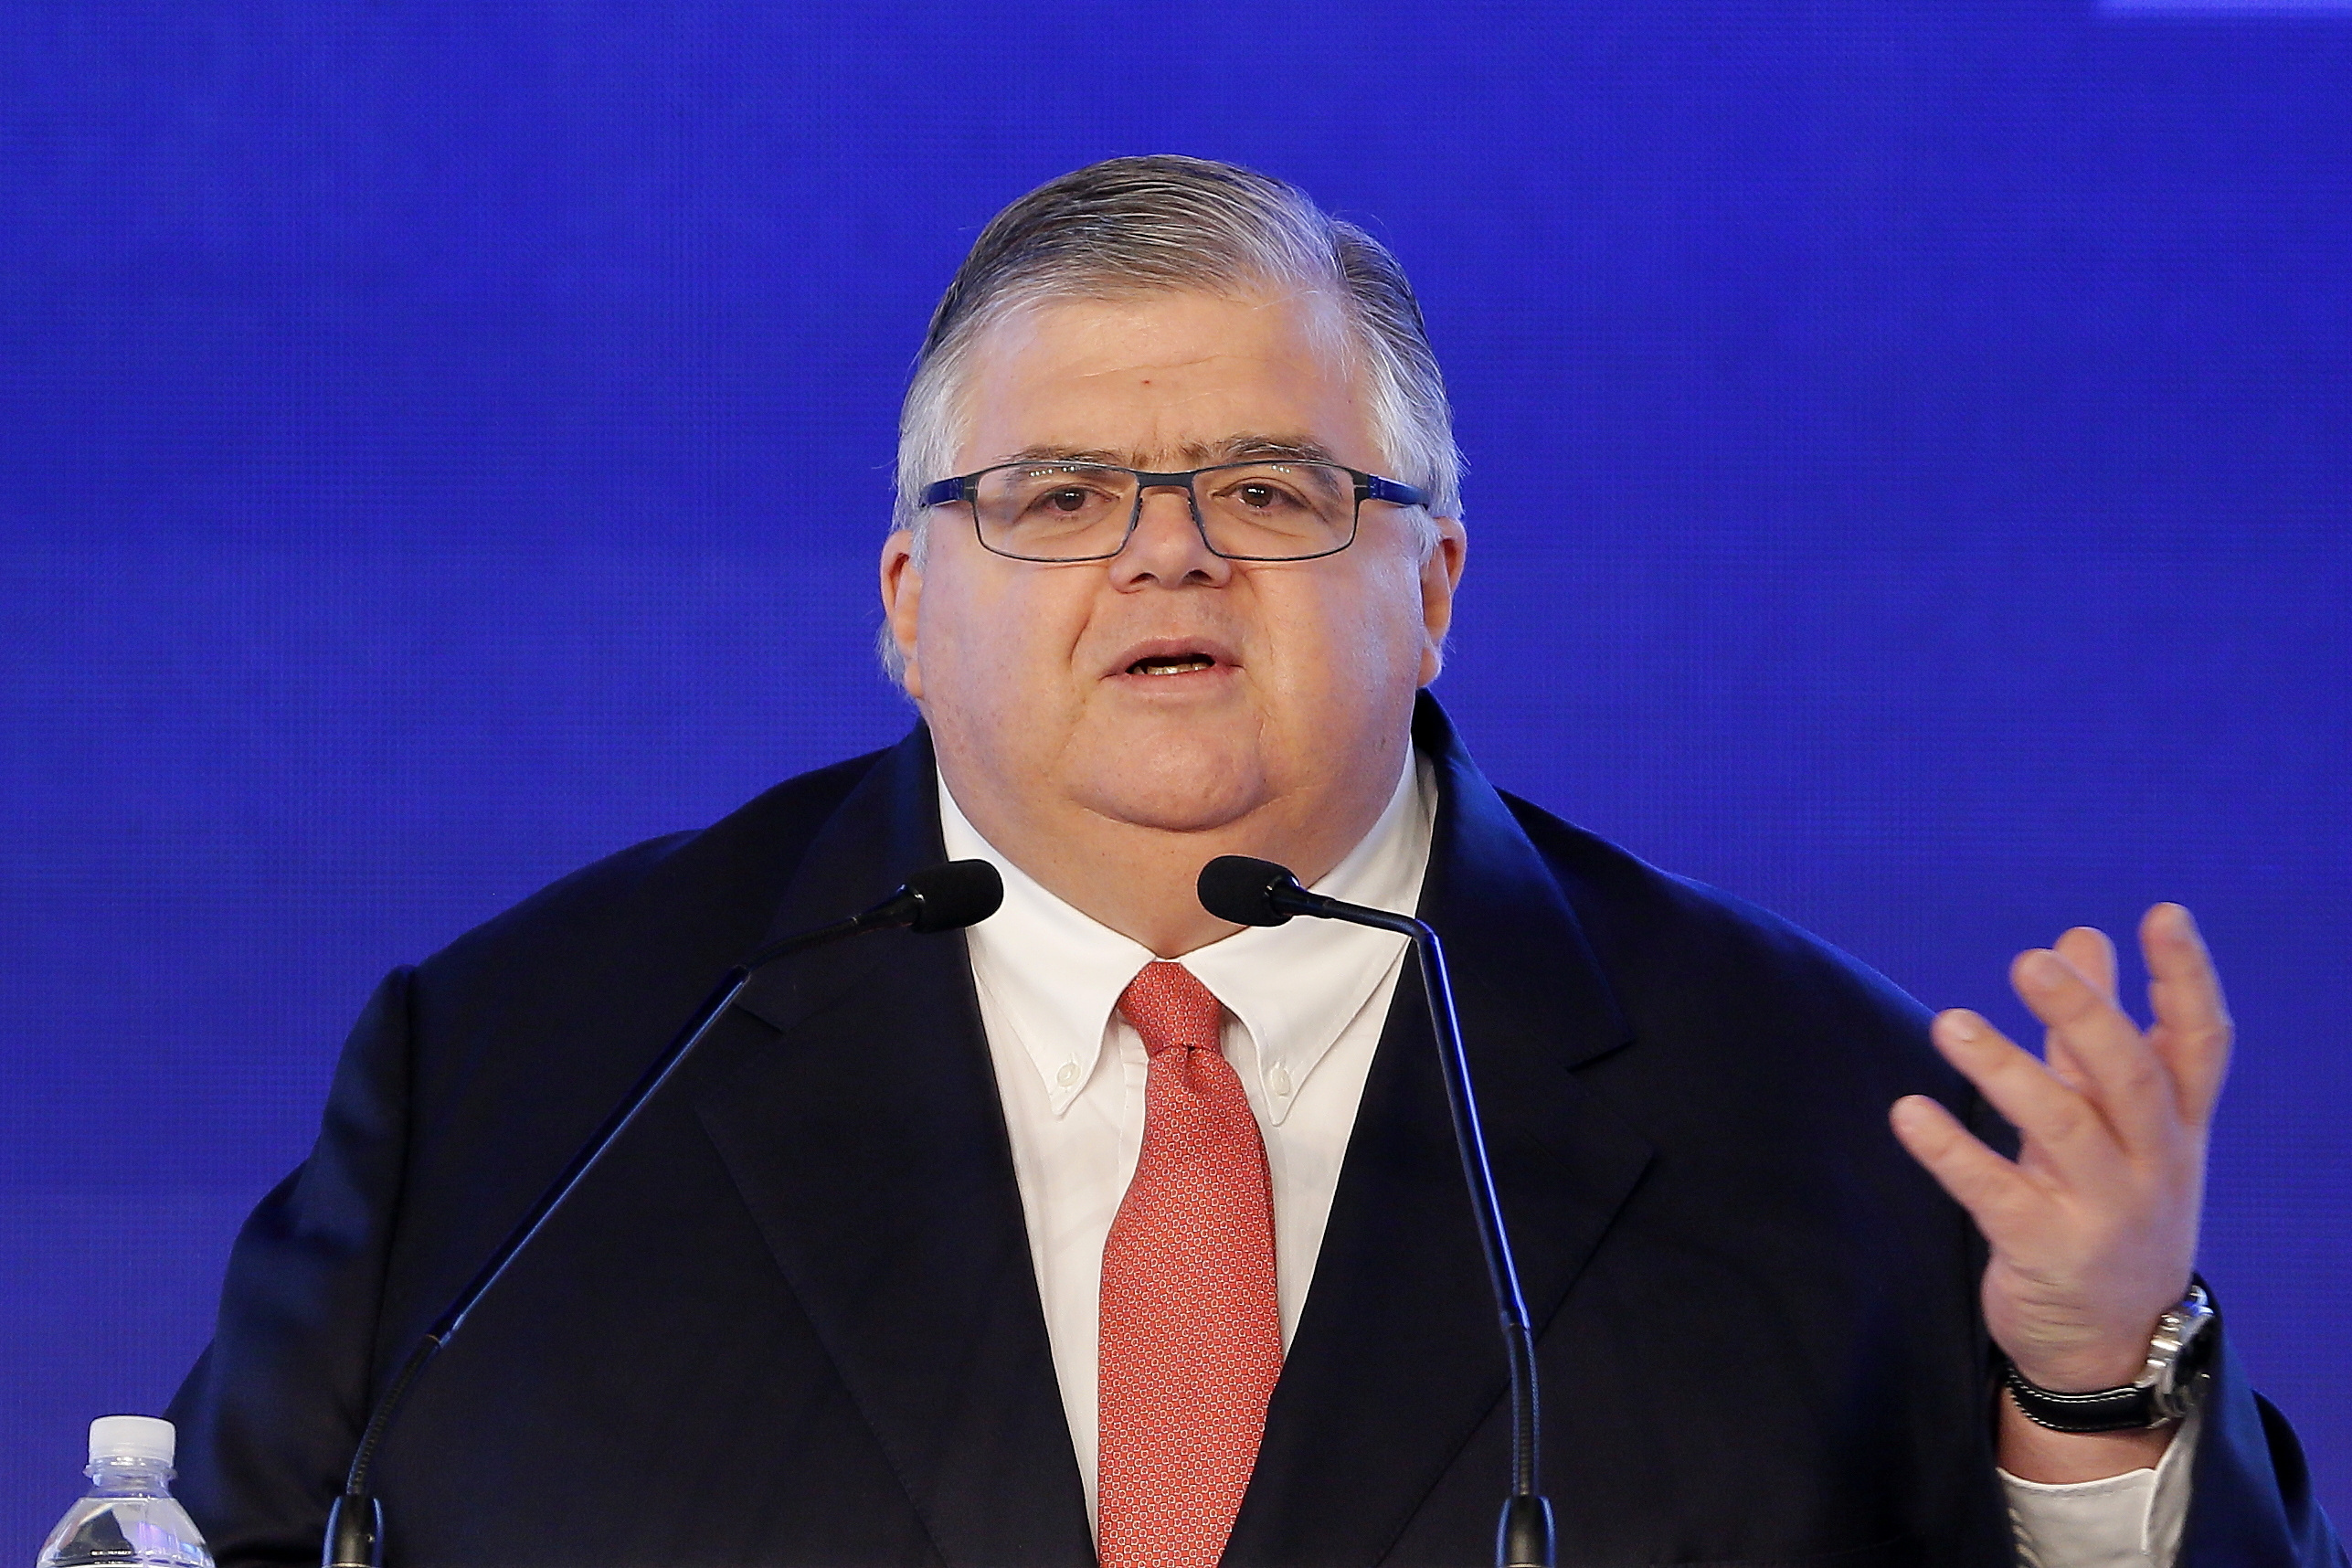 Agustín Carstens is currently the general manager of the Banco de Pagos Internacionales, a bank for central banks. EFE/José Méndez